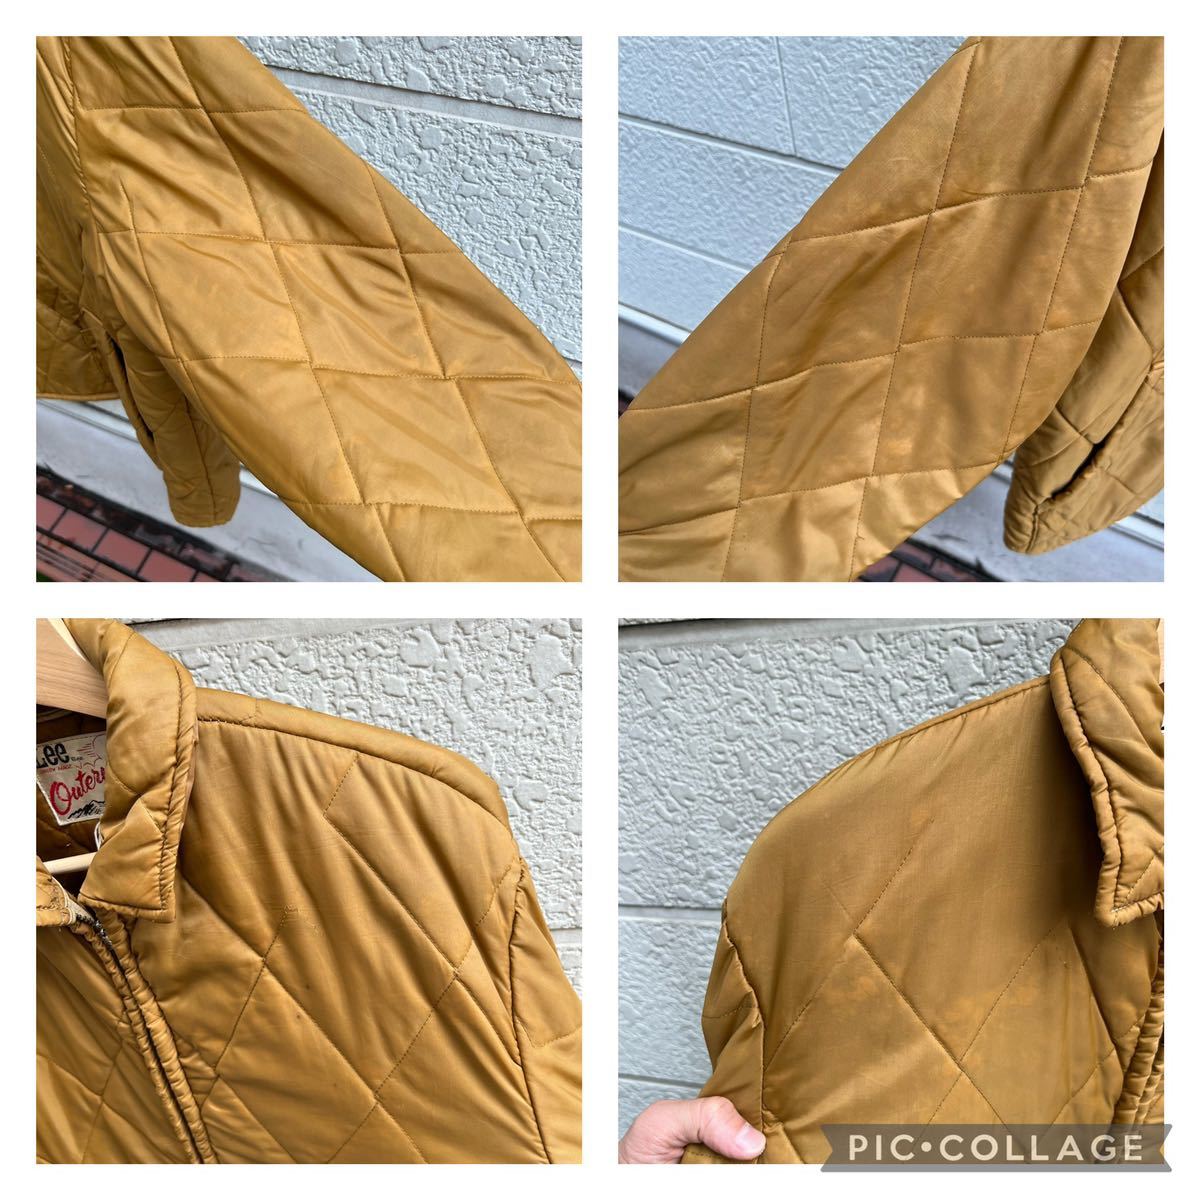 70s US古着 キルティングジャケット ジップアップ ブラウン ナイロン Lee Outerwear リー アメリカ古着 vintage  ヴィンテージ UNION MADE